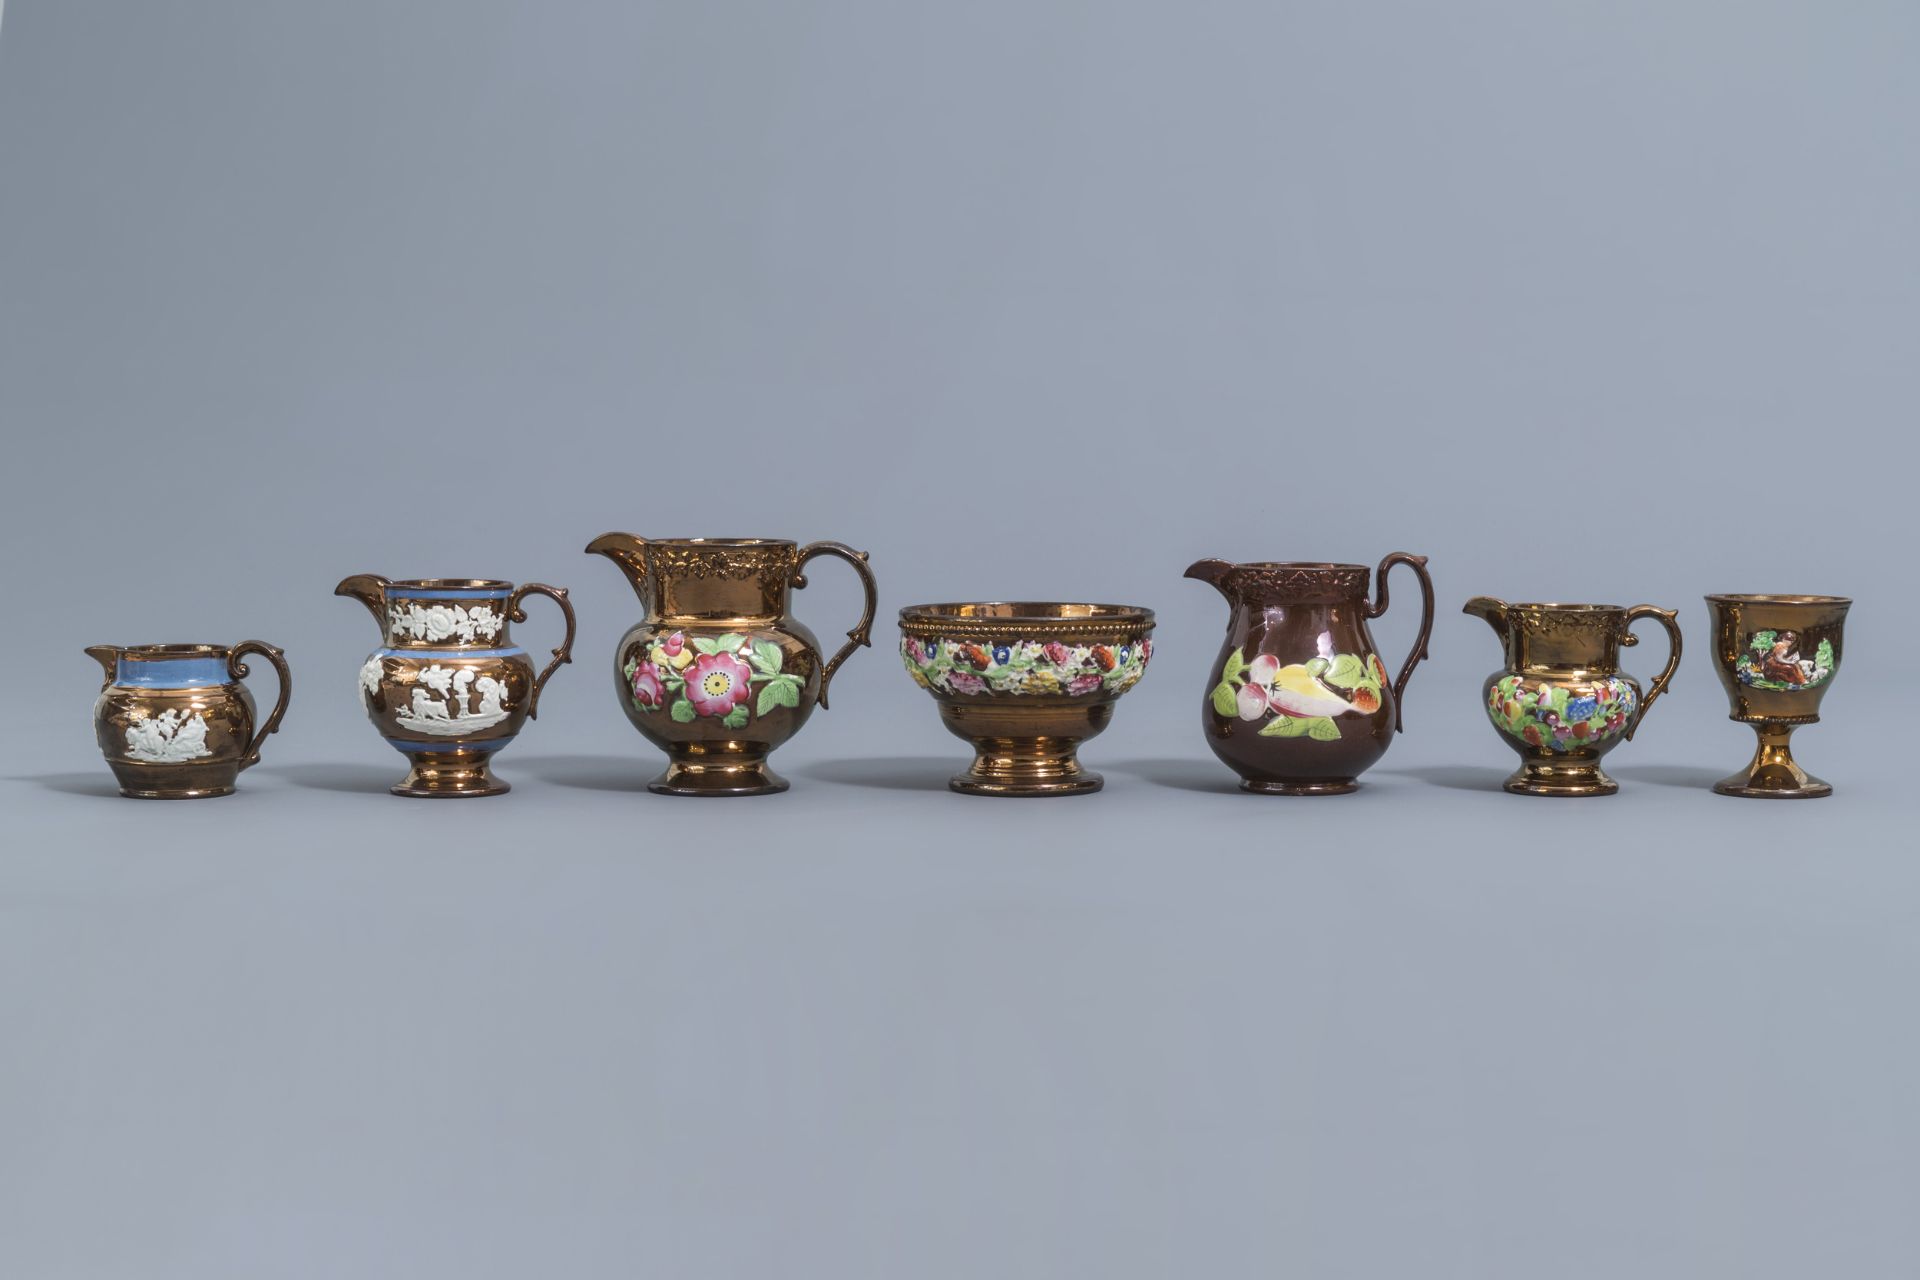 A varied collection of English lustreware items with relief design, 19th C. - Image 7 of 50